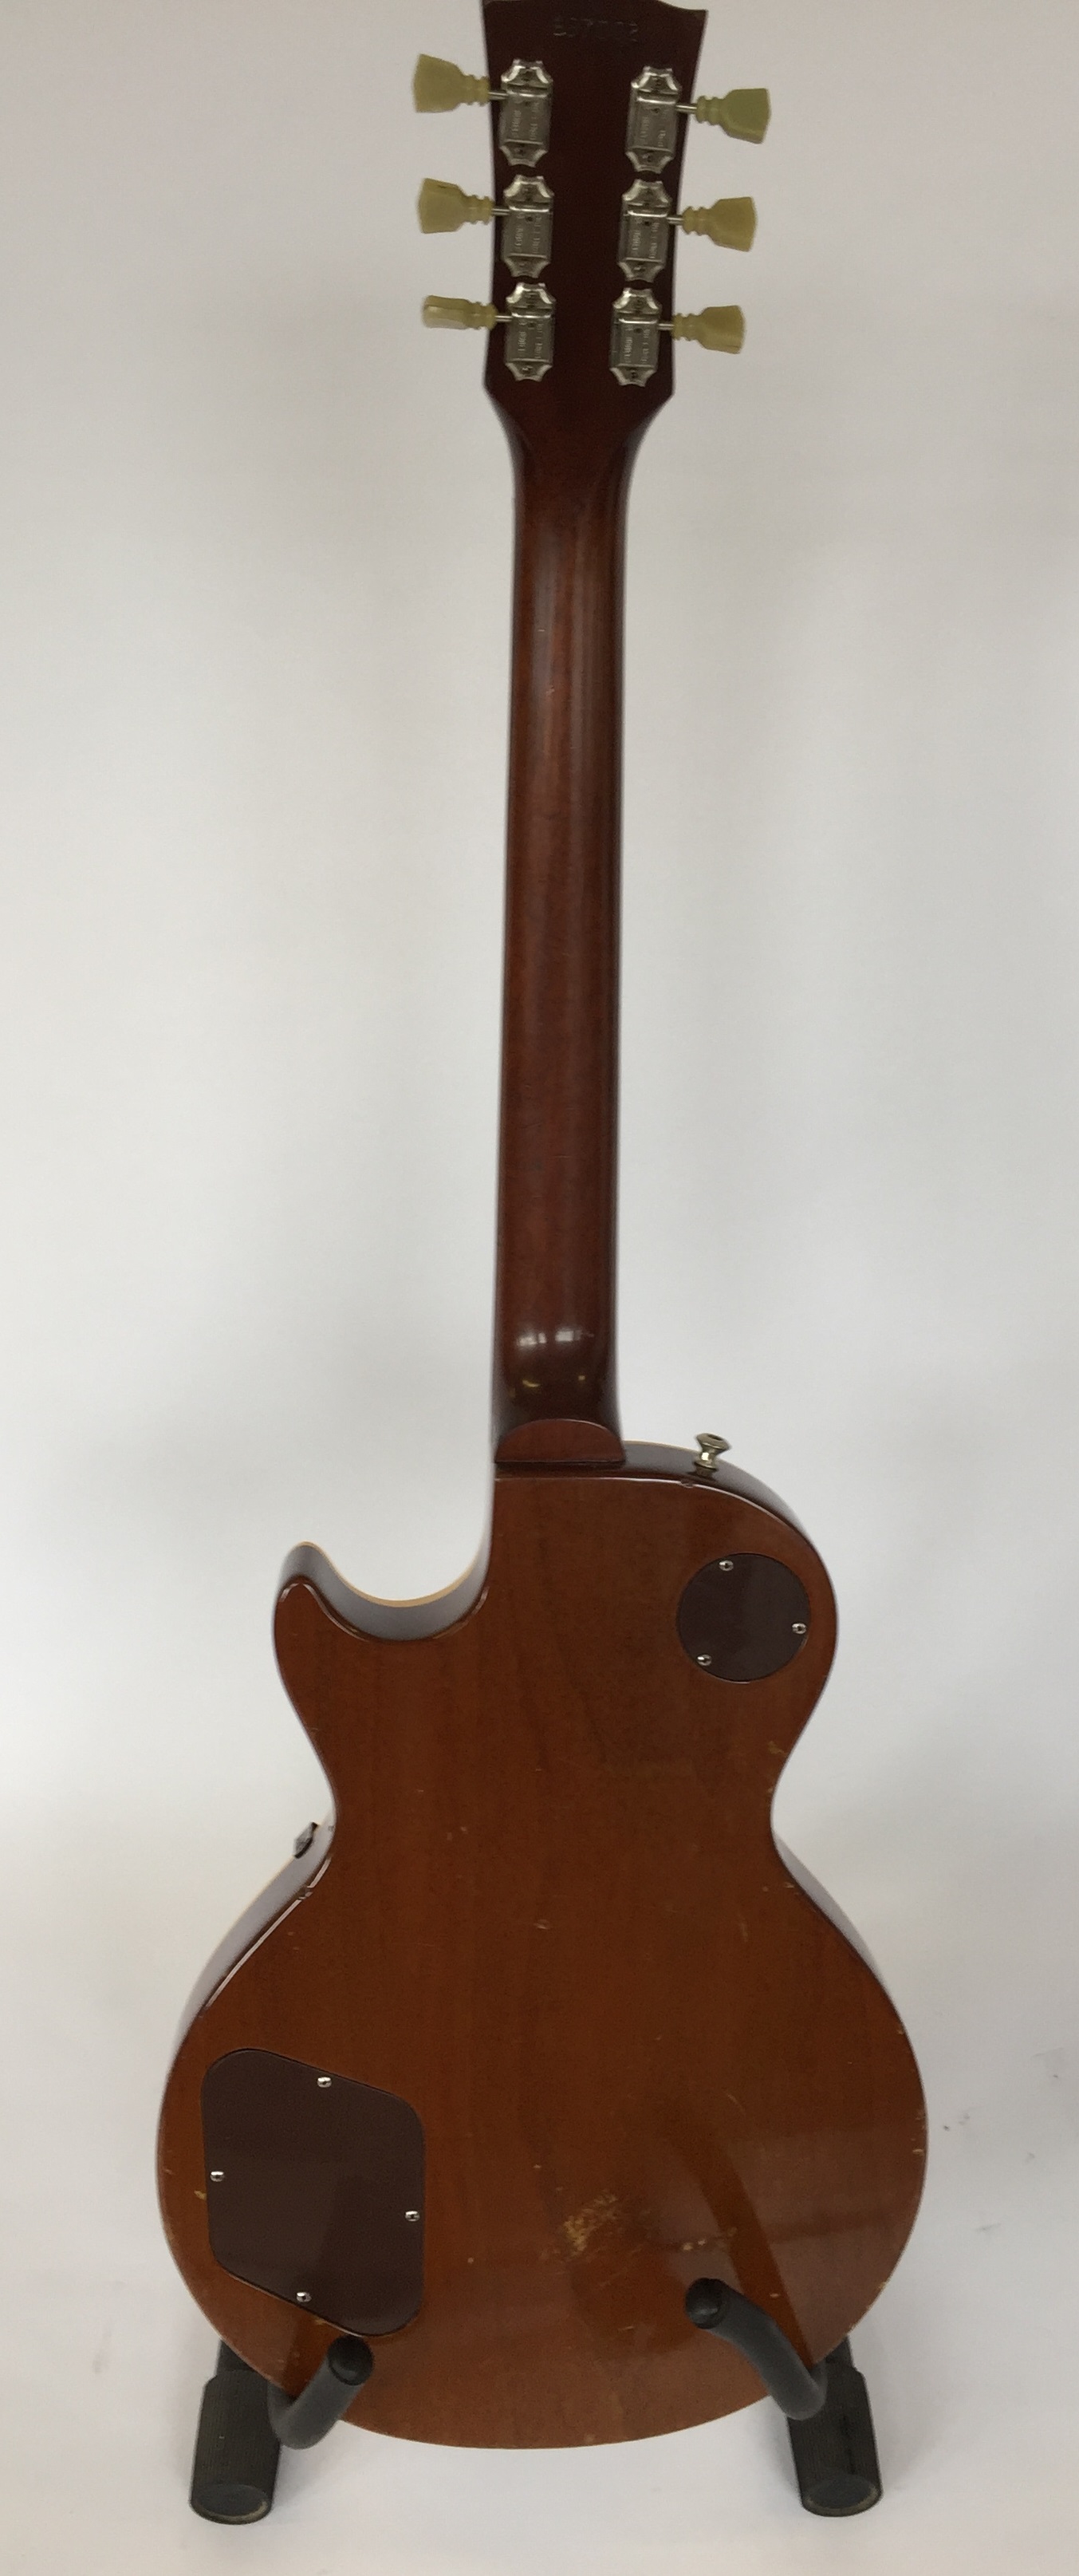 GIBSON LES PAUL GOLDTOP 1969 ***TEMPORARILY WITHDRAWN UNTIL RECEIPT OF CITES ARTICLE 10 - Image 6 of 8